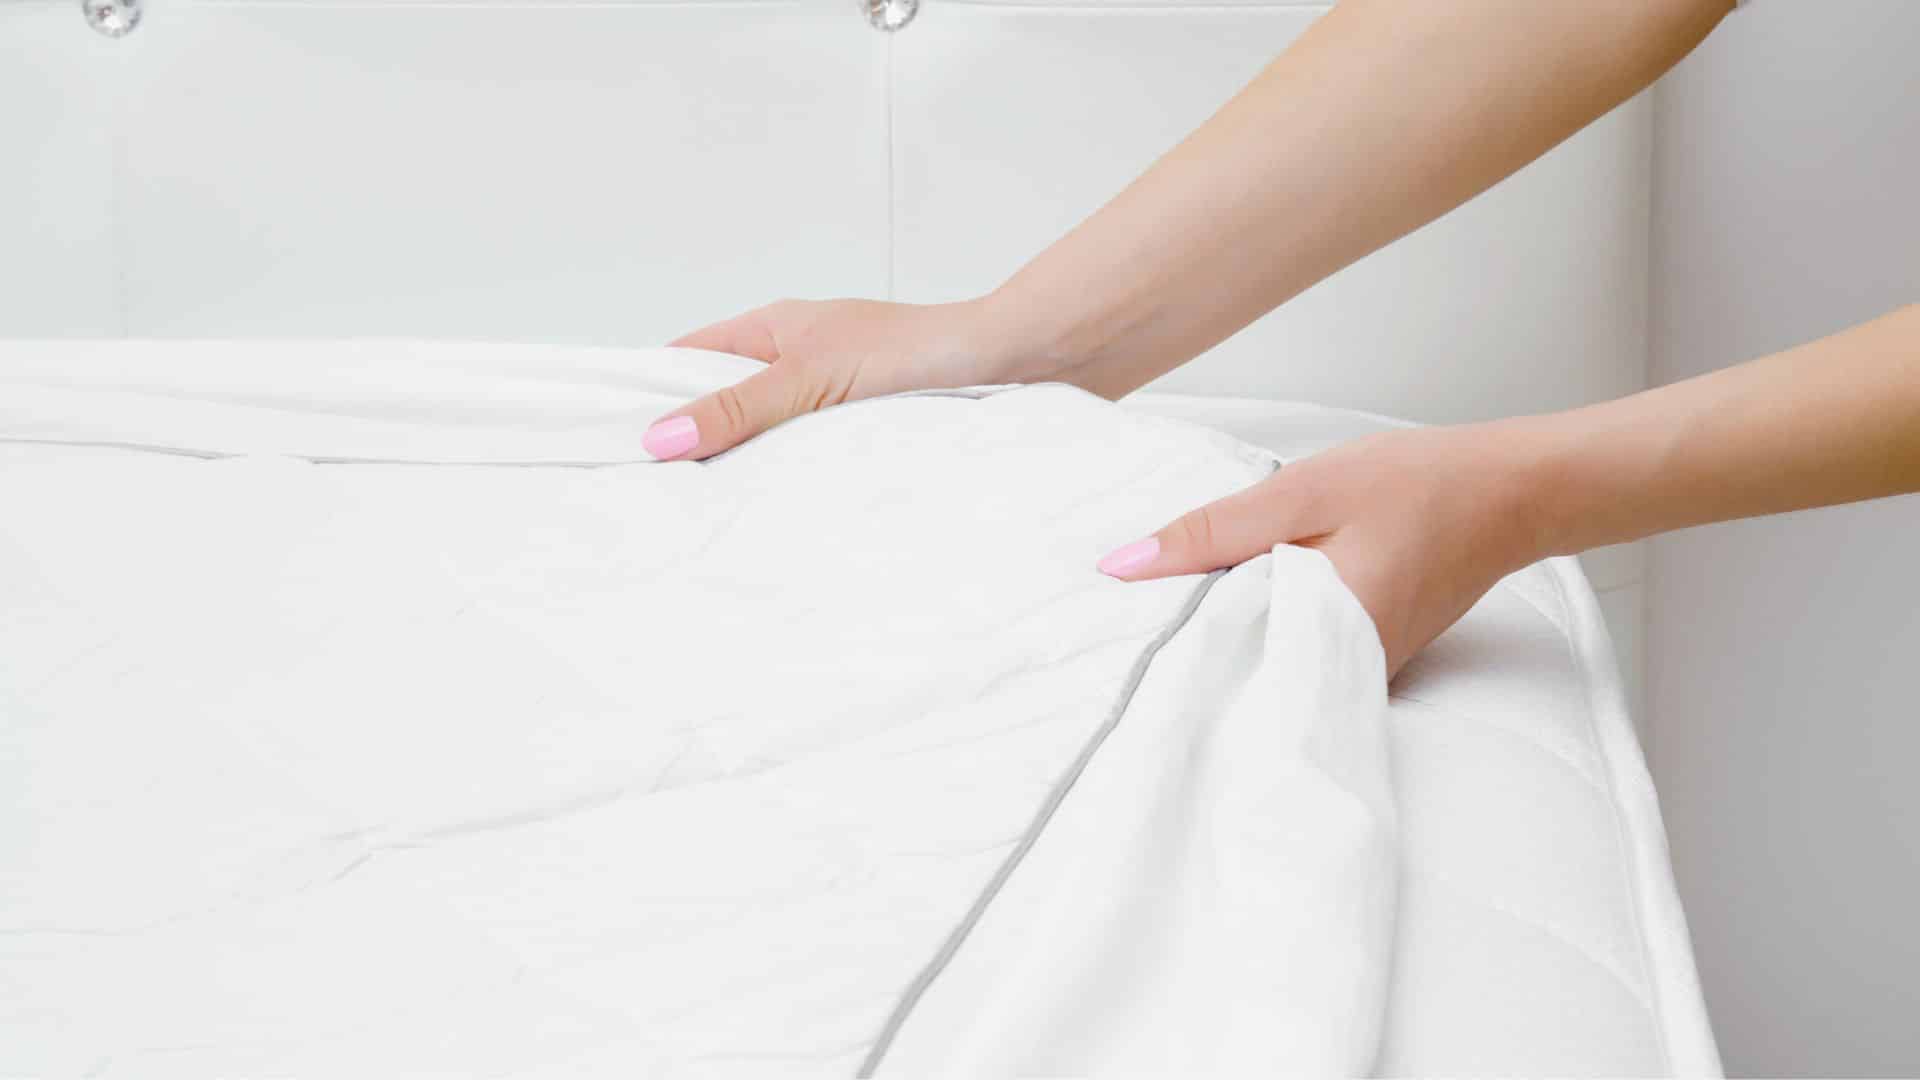 Putting on a mattress protector